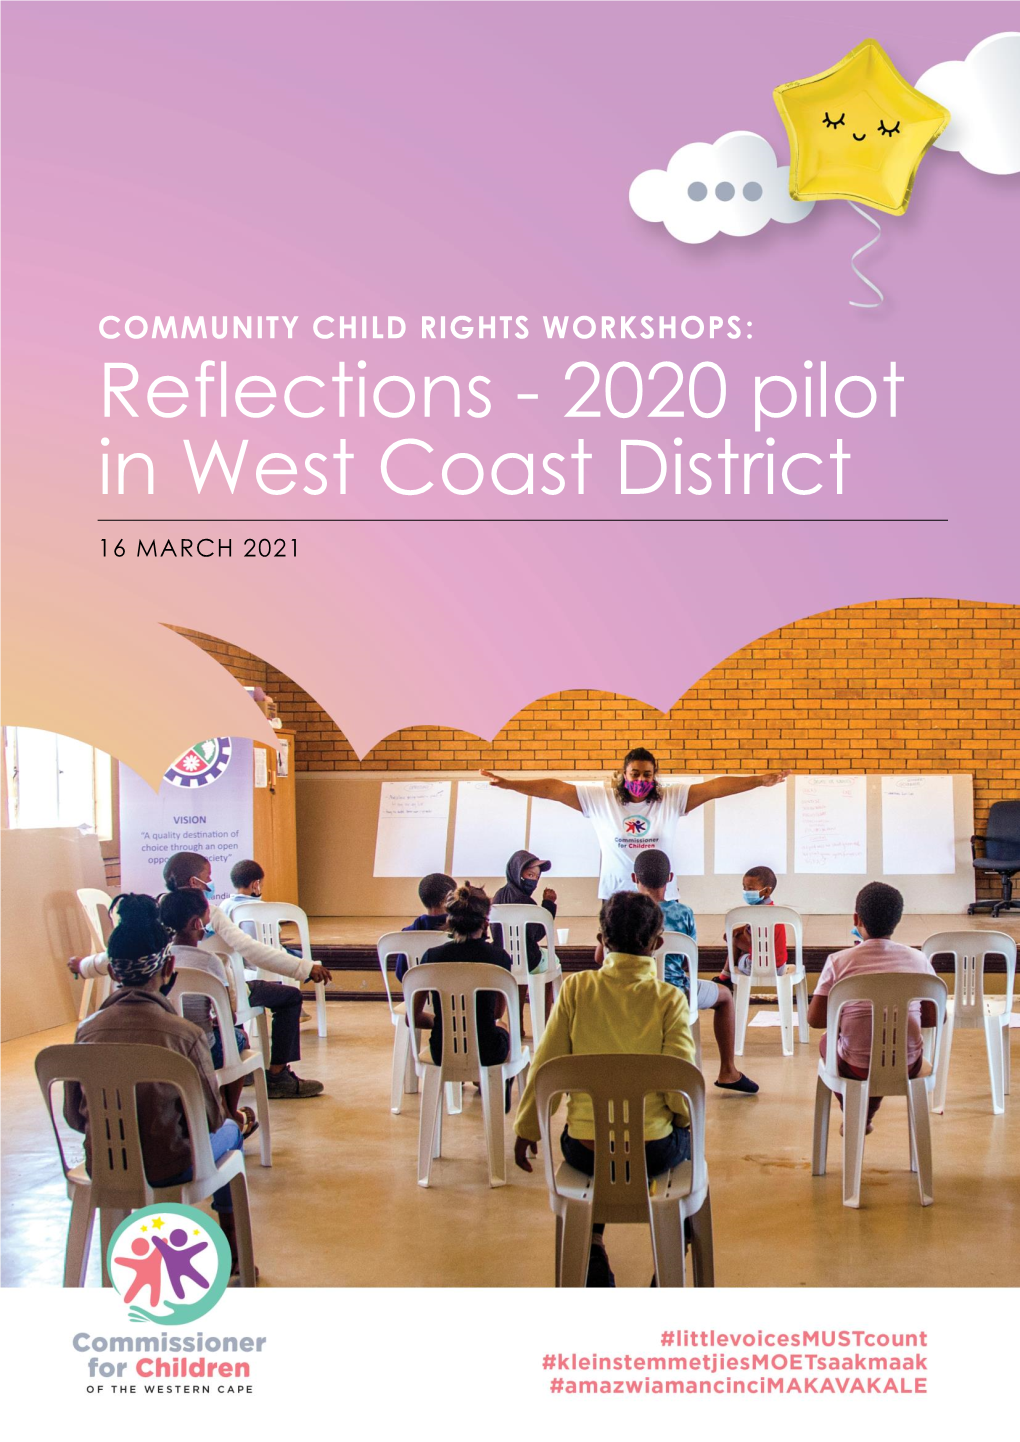 COMMUNITY CHILD RIGHTS WORKSHOPS: Reflections - 2020 Pilot in West Coast District